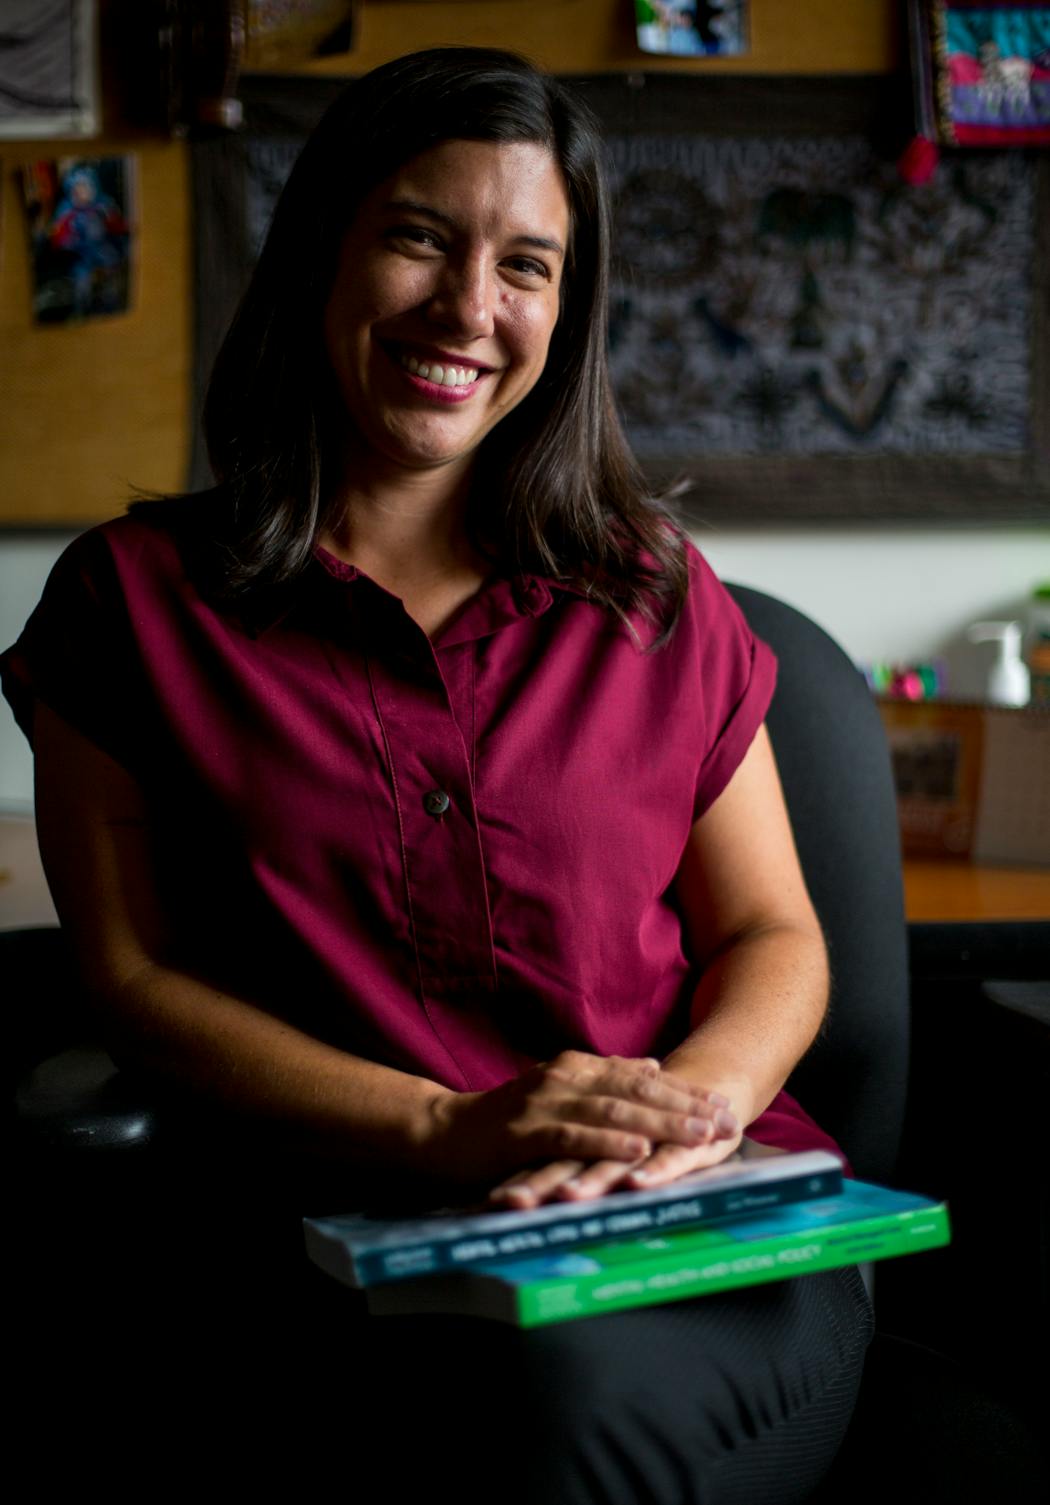 Jillian Peterson studies violence in society as a professor of criminology and criminal justice at Hamline University.